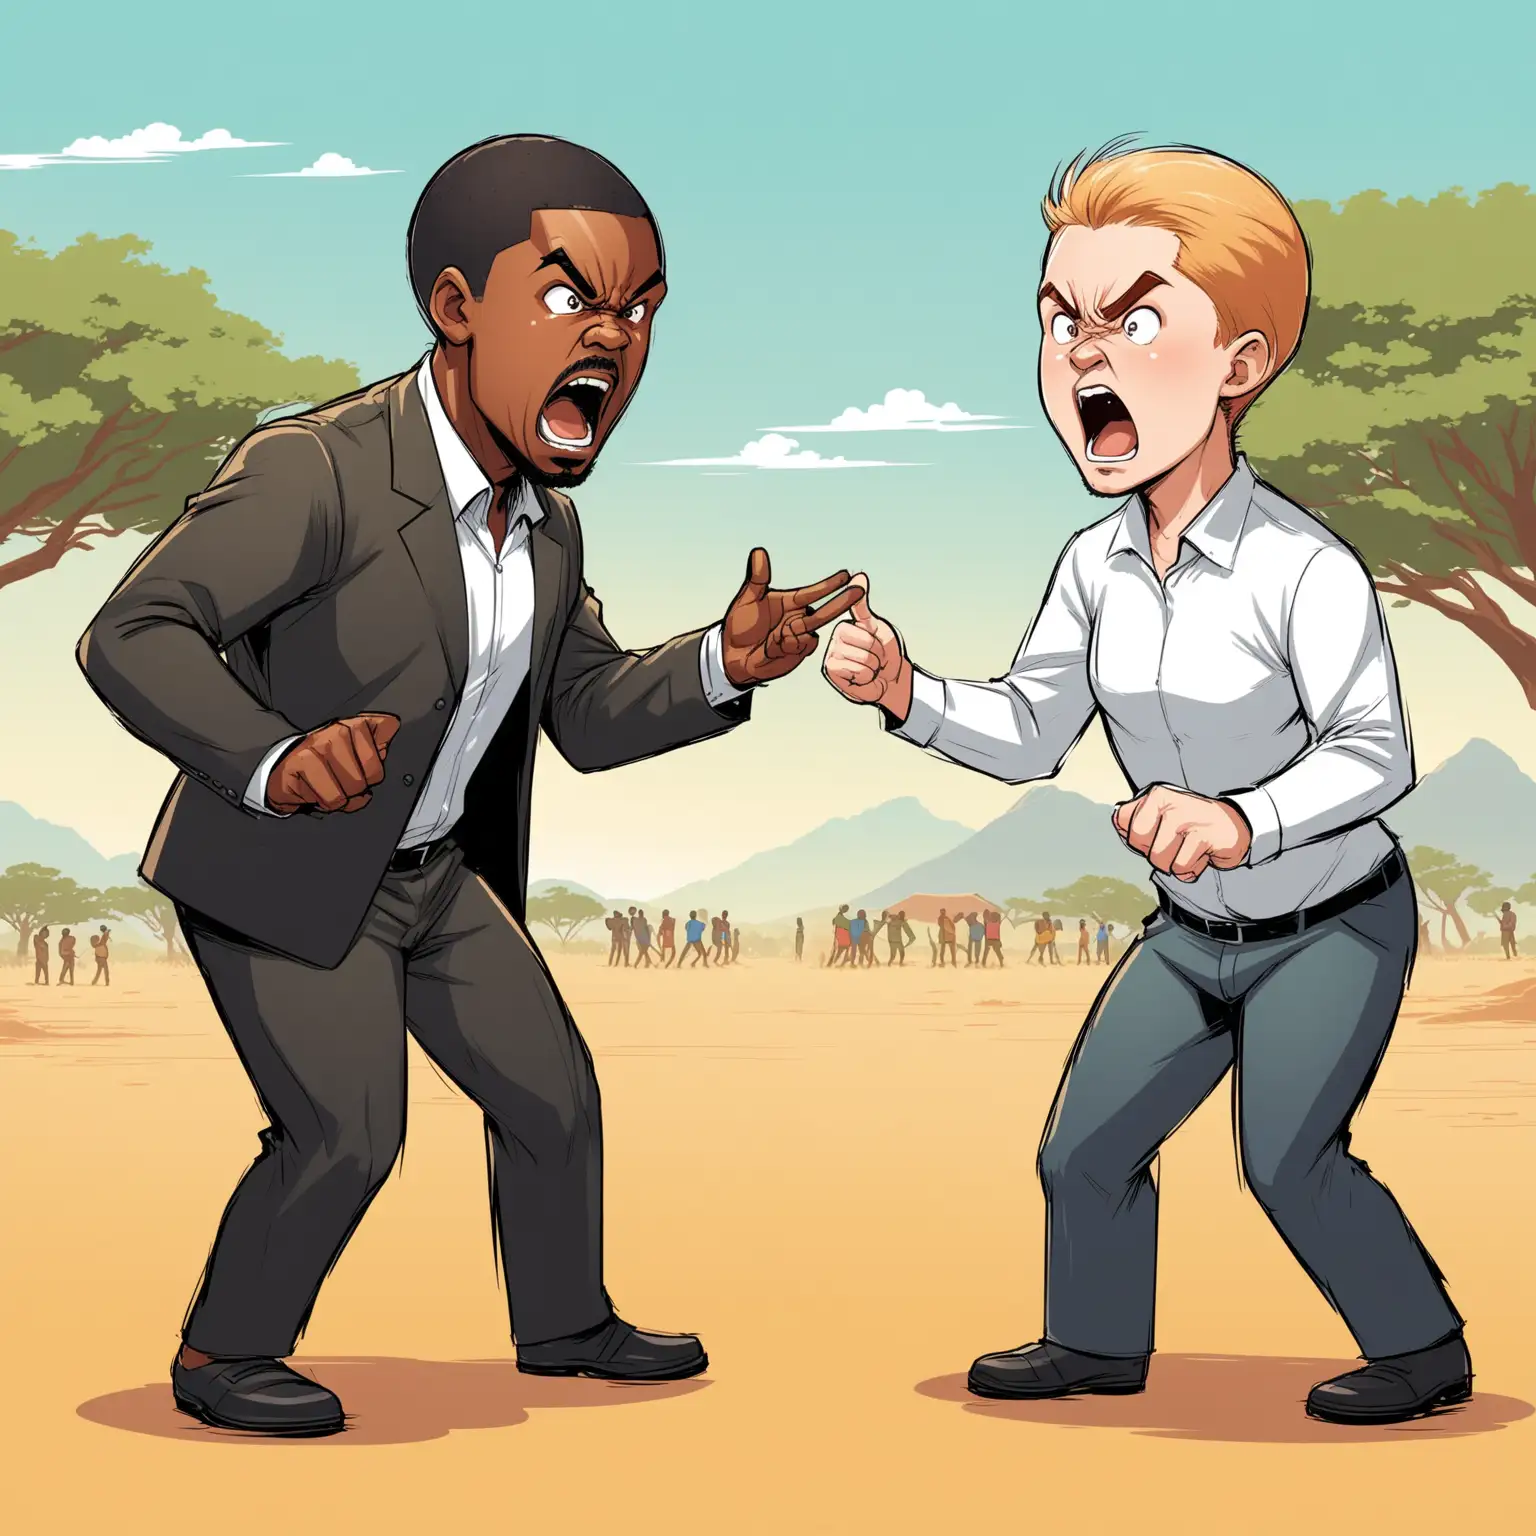 Illustrate a photo of a black person and white person arguing and standing in south africa. Cartoon style.